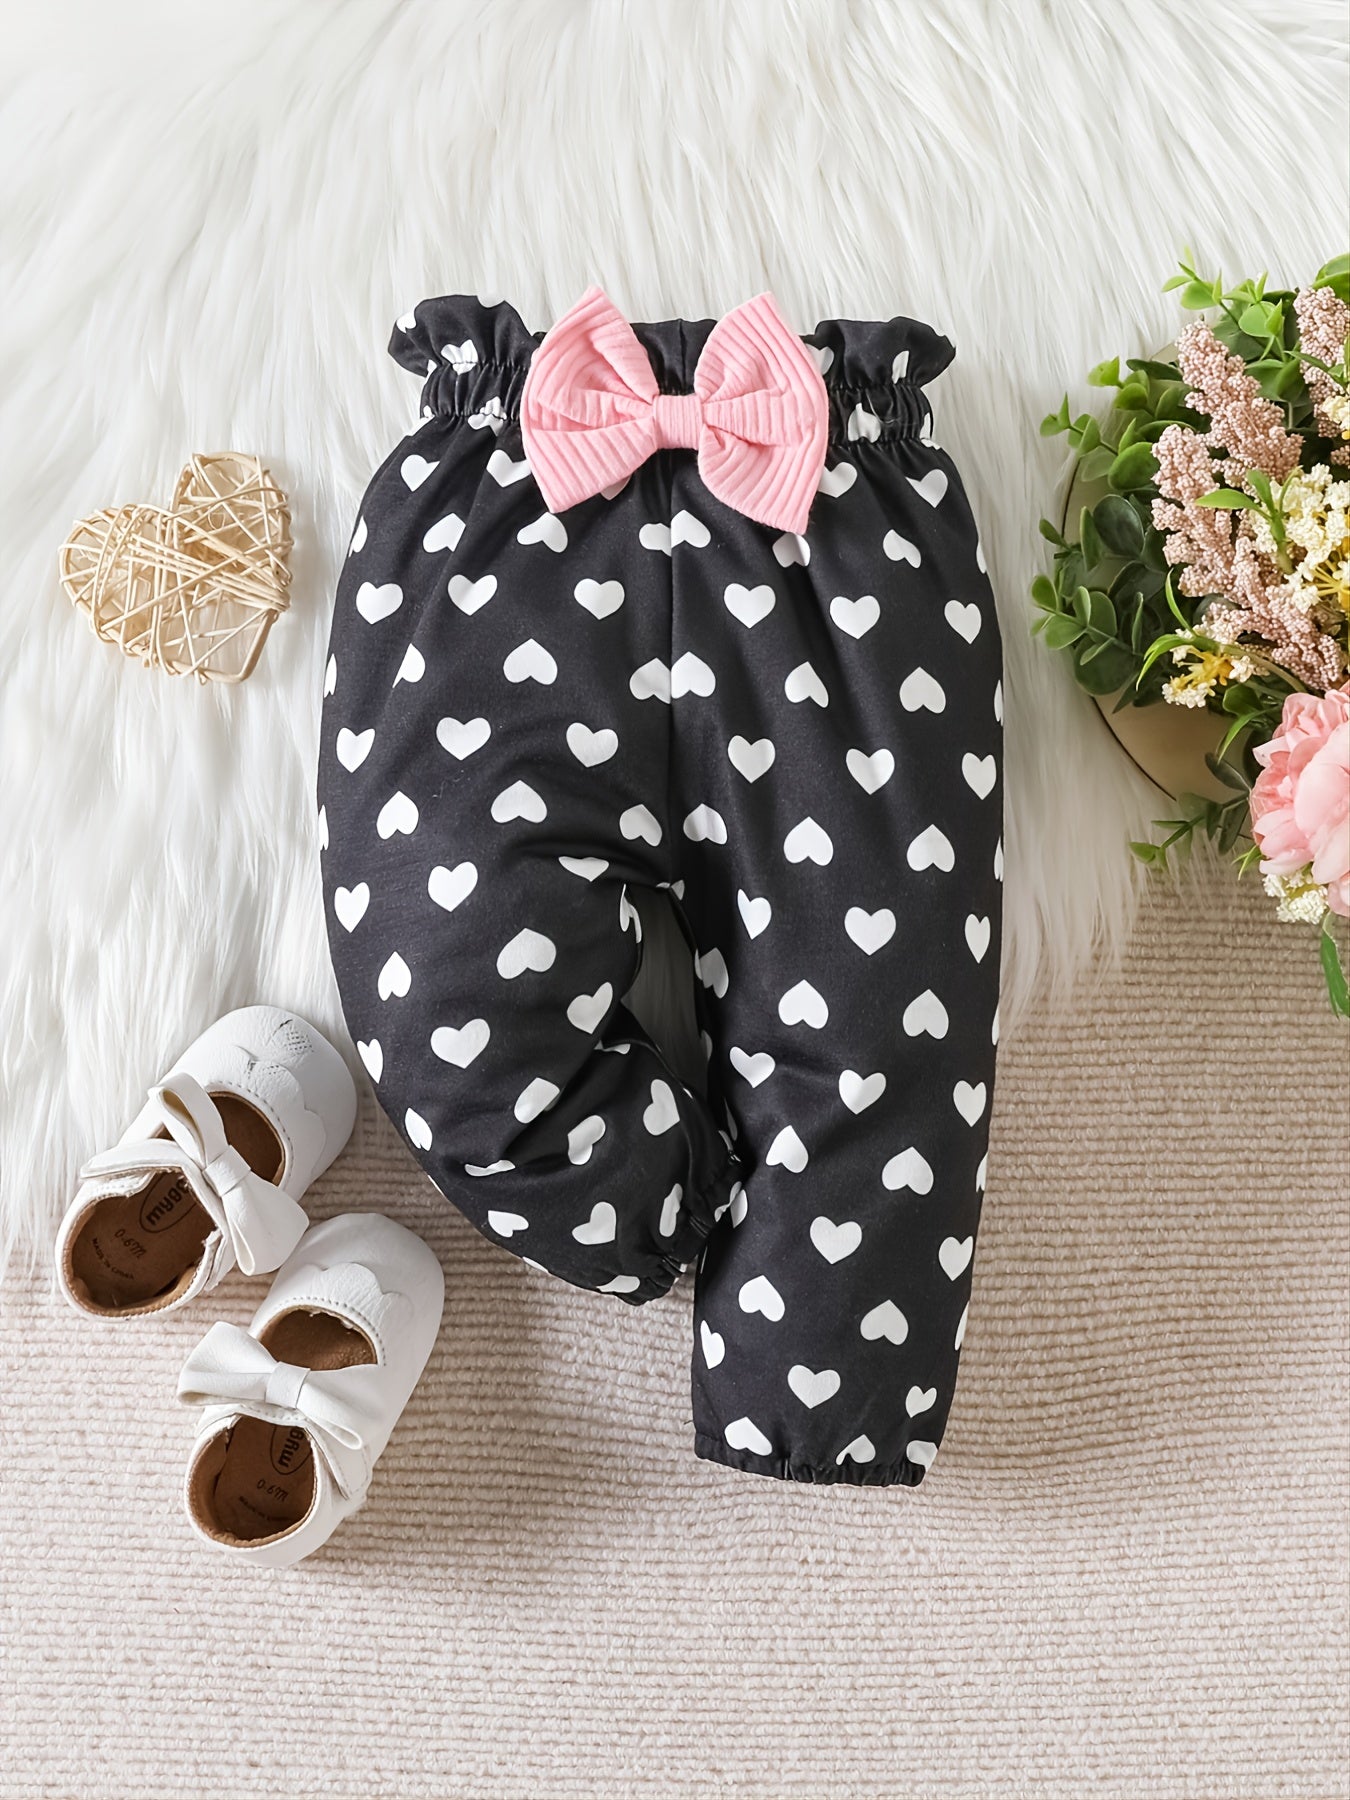 Baby Toddler Girls Cotton Long-Sleeve Bodysuits Romper + Heart Pattern Pants + Headband Outfit Sets Baby Clothes